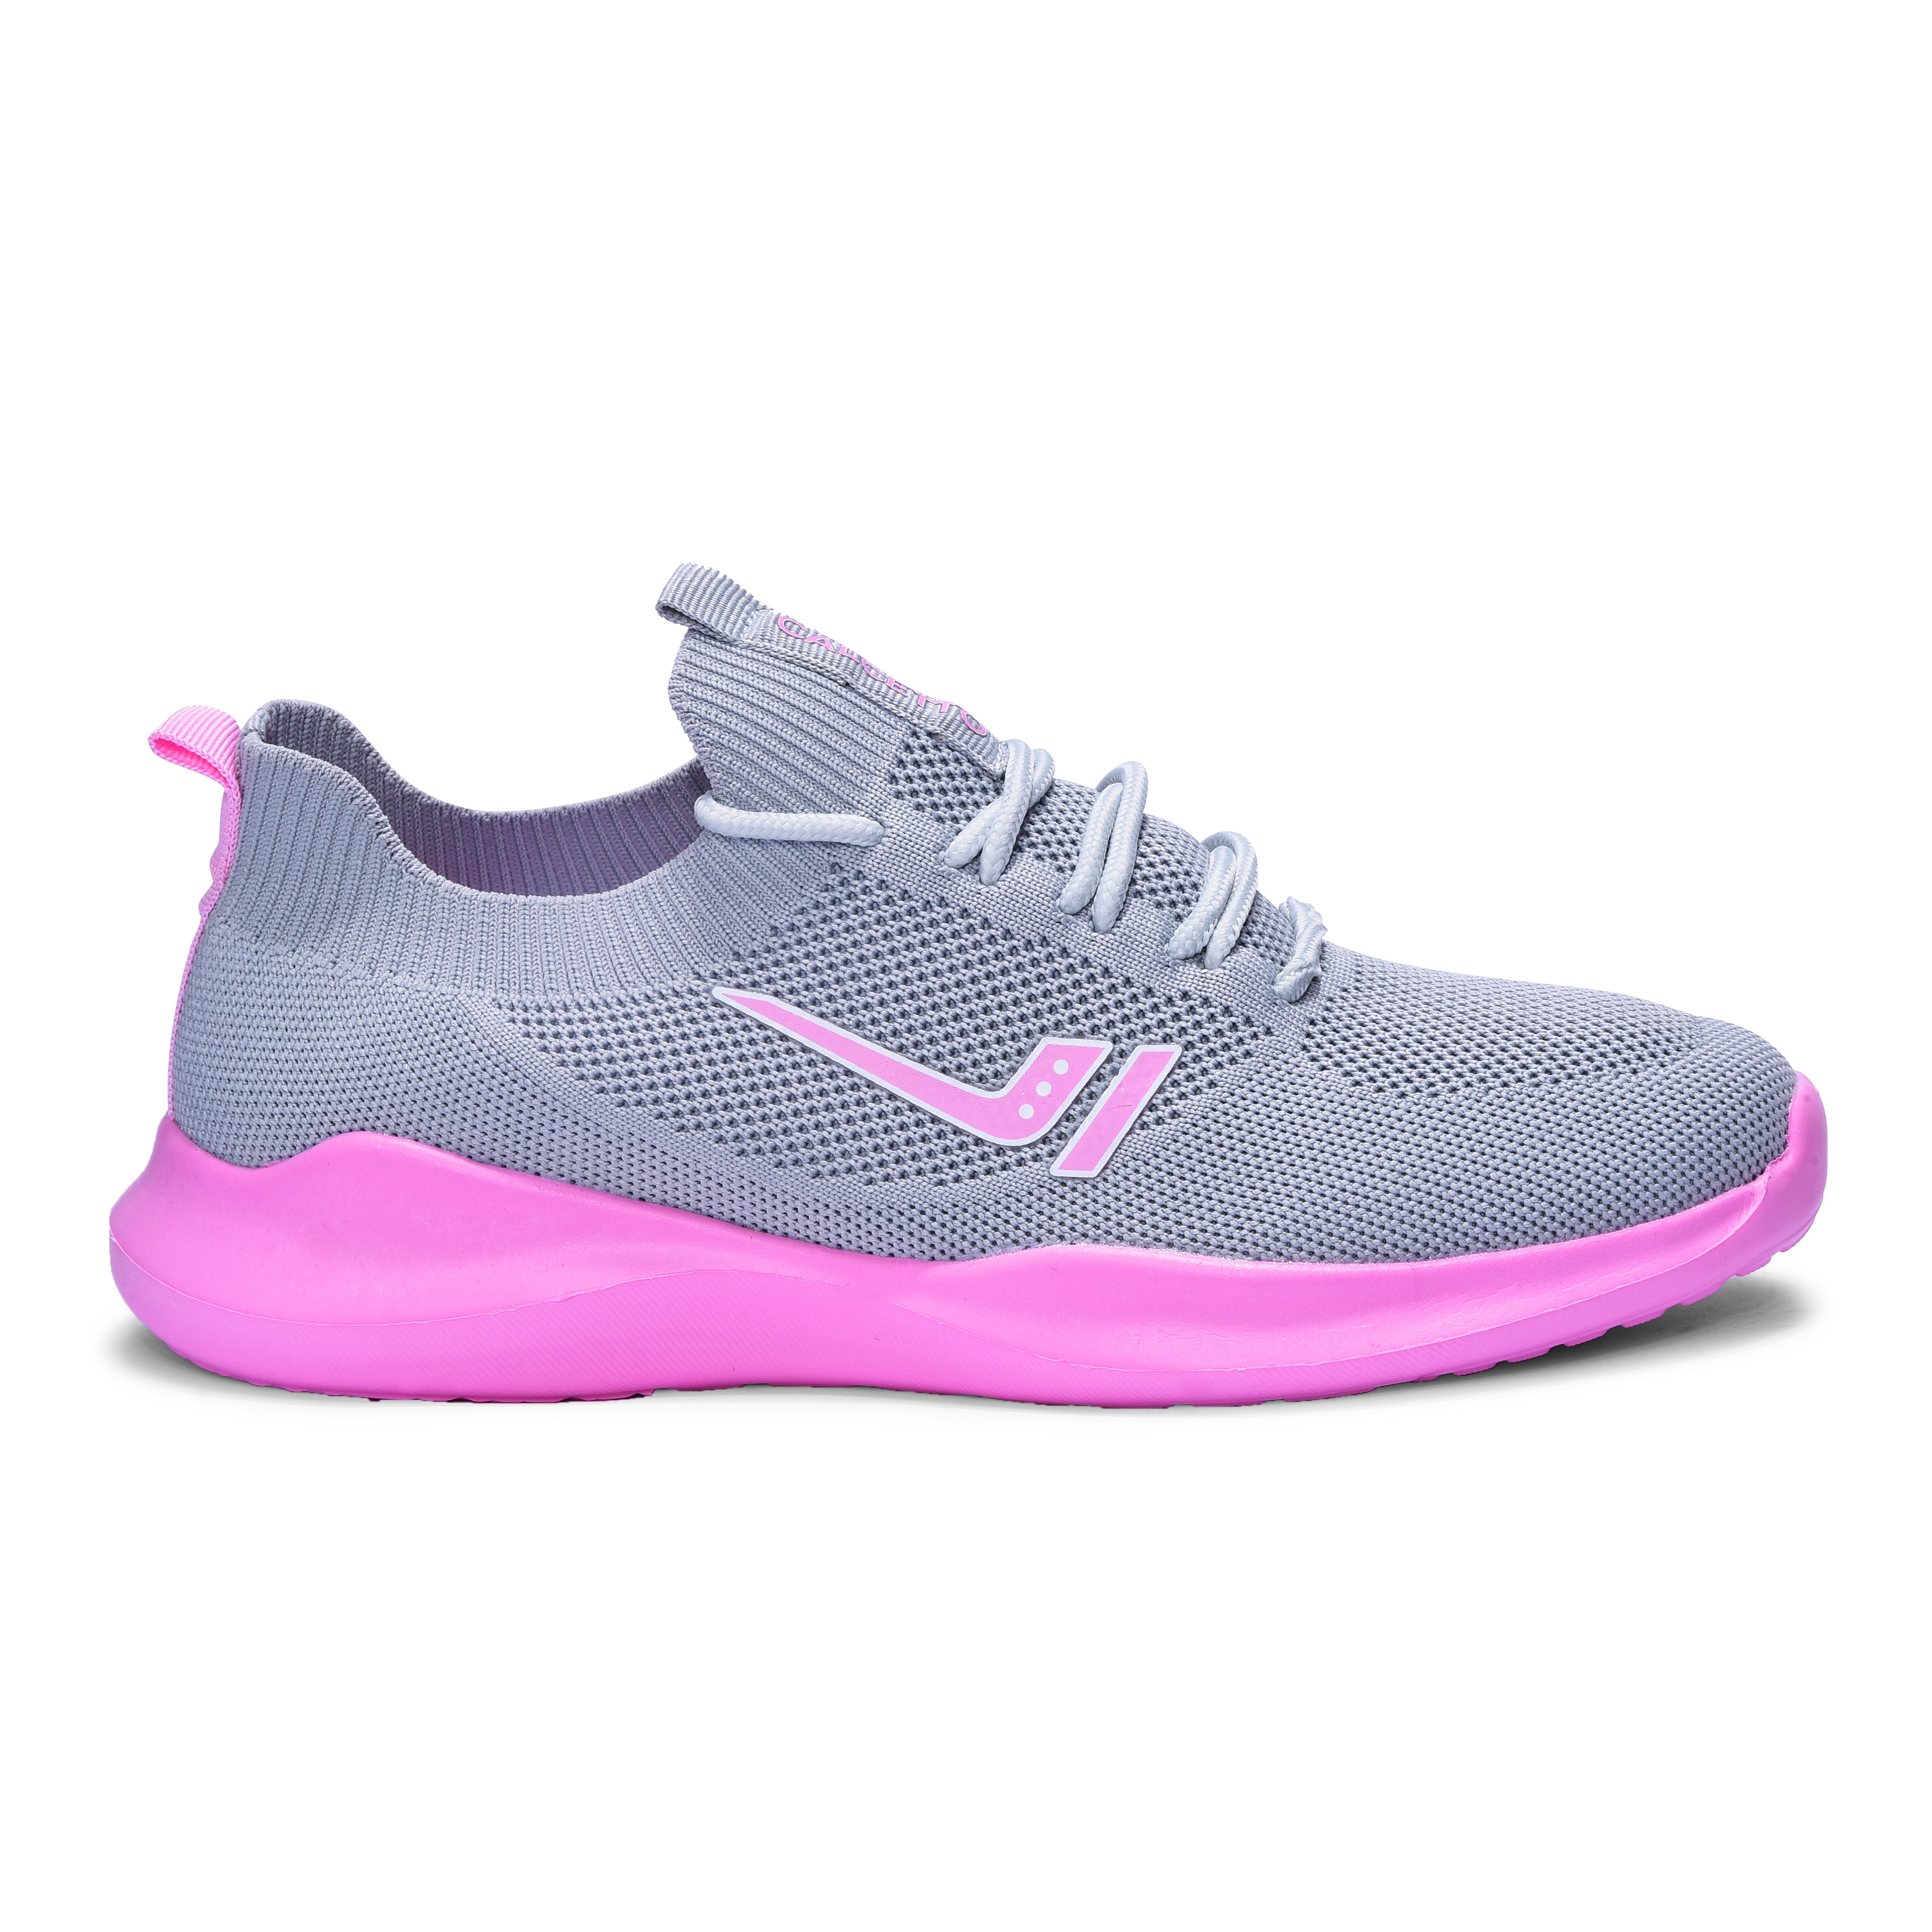 Calcetto CLT-9818 L Grey Pink Casual Shoe For Women